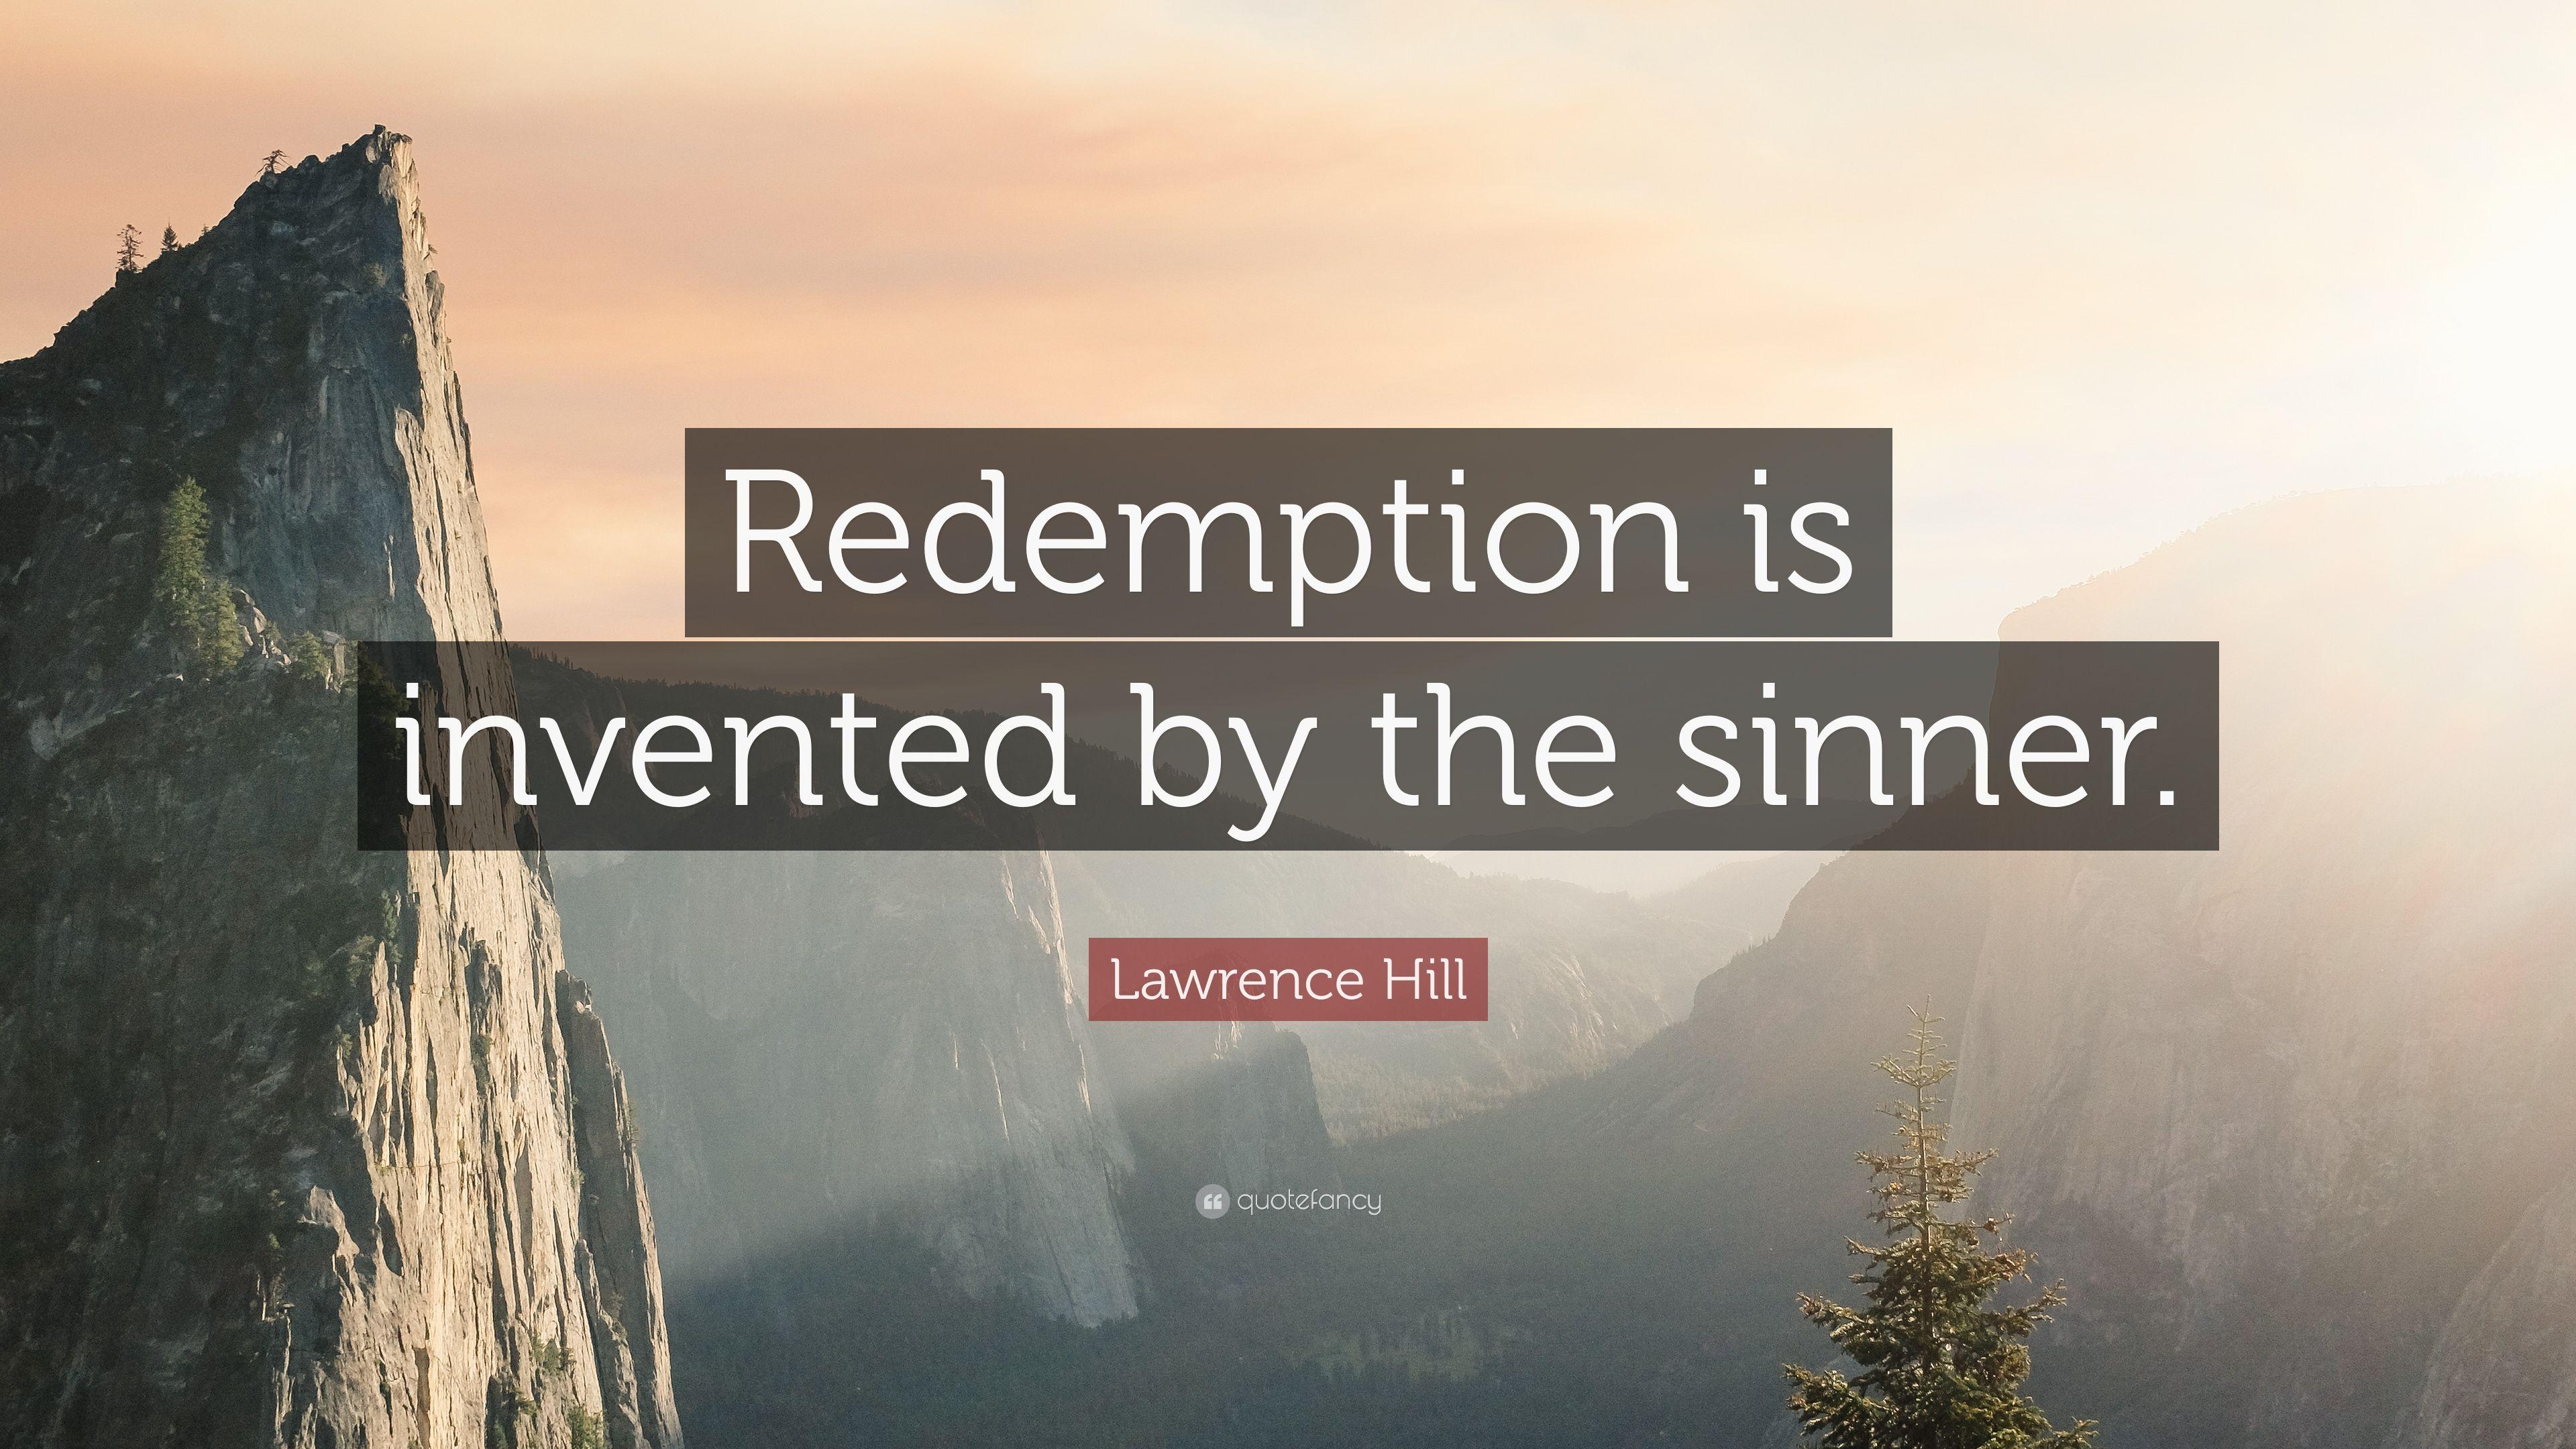 Lawrence Hill Quote: “Redemption is invented by the sinner.” 2